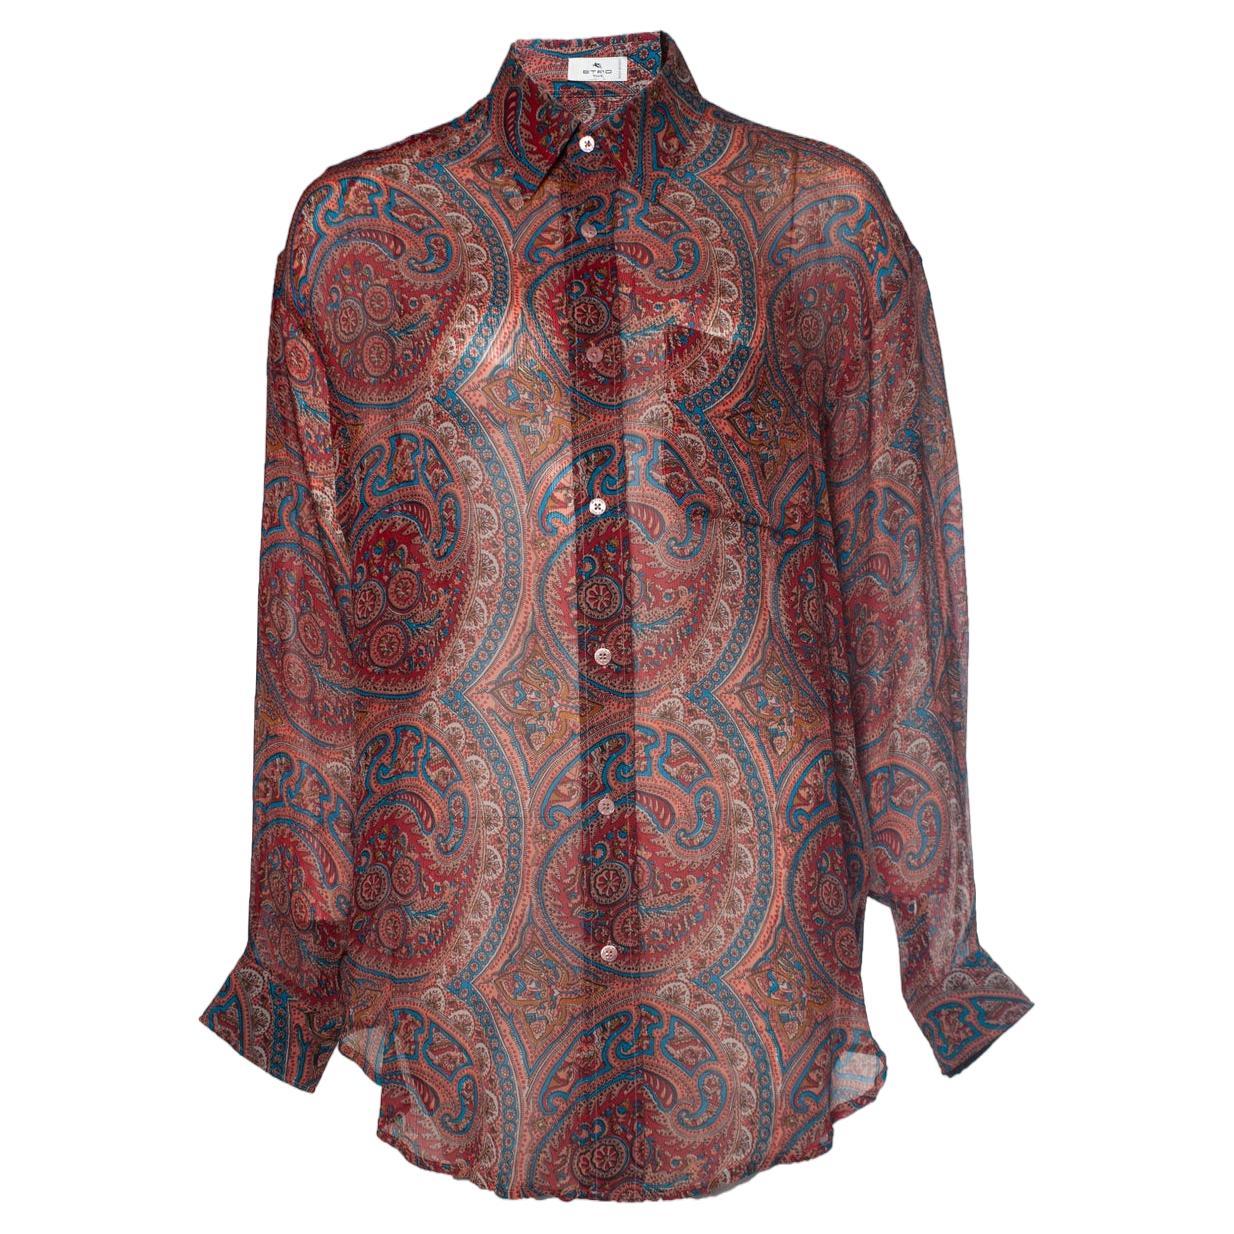 Etro, sheer Paisley printed blouse in red